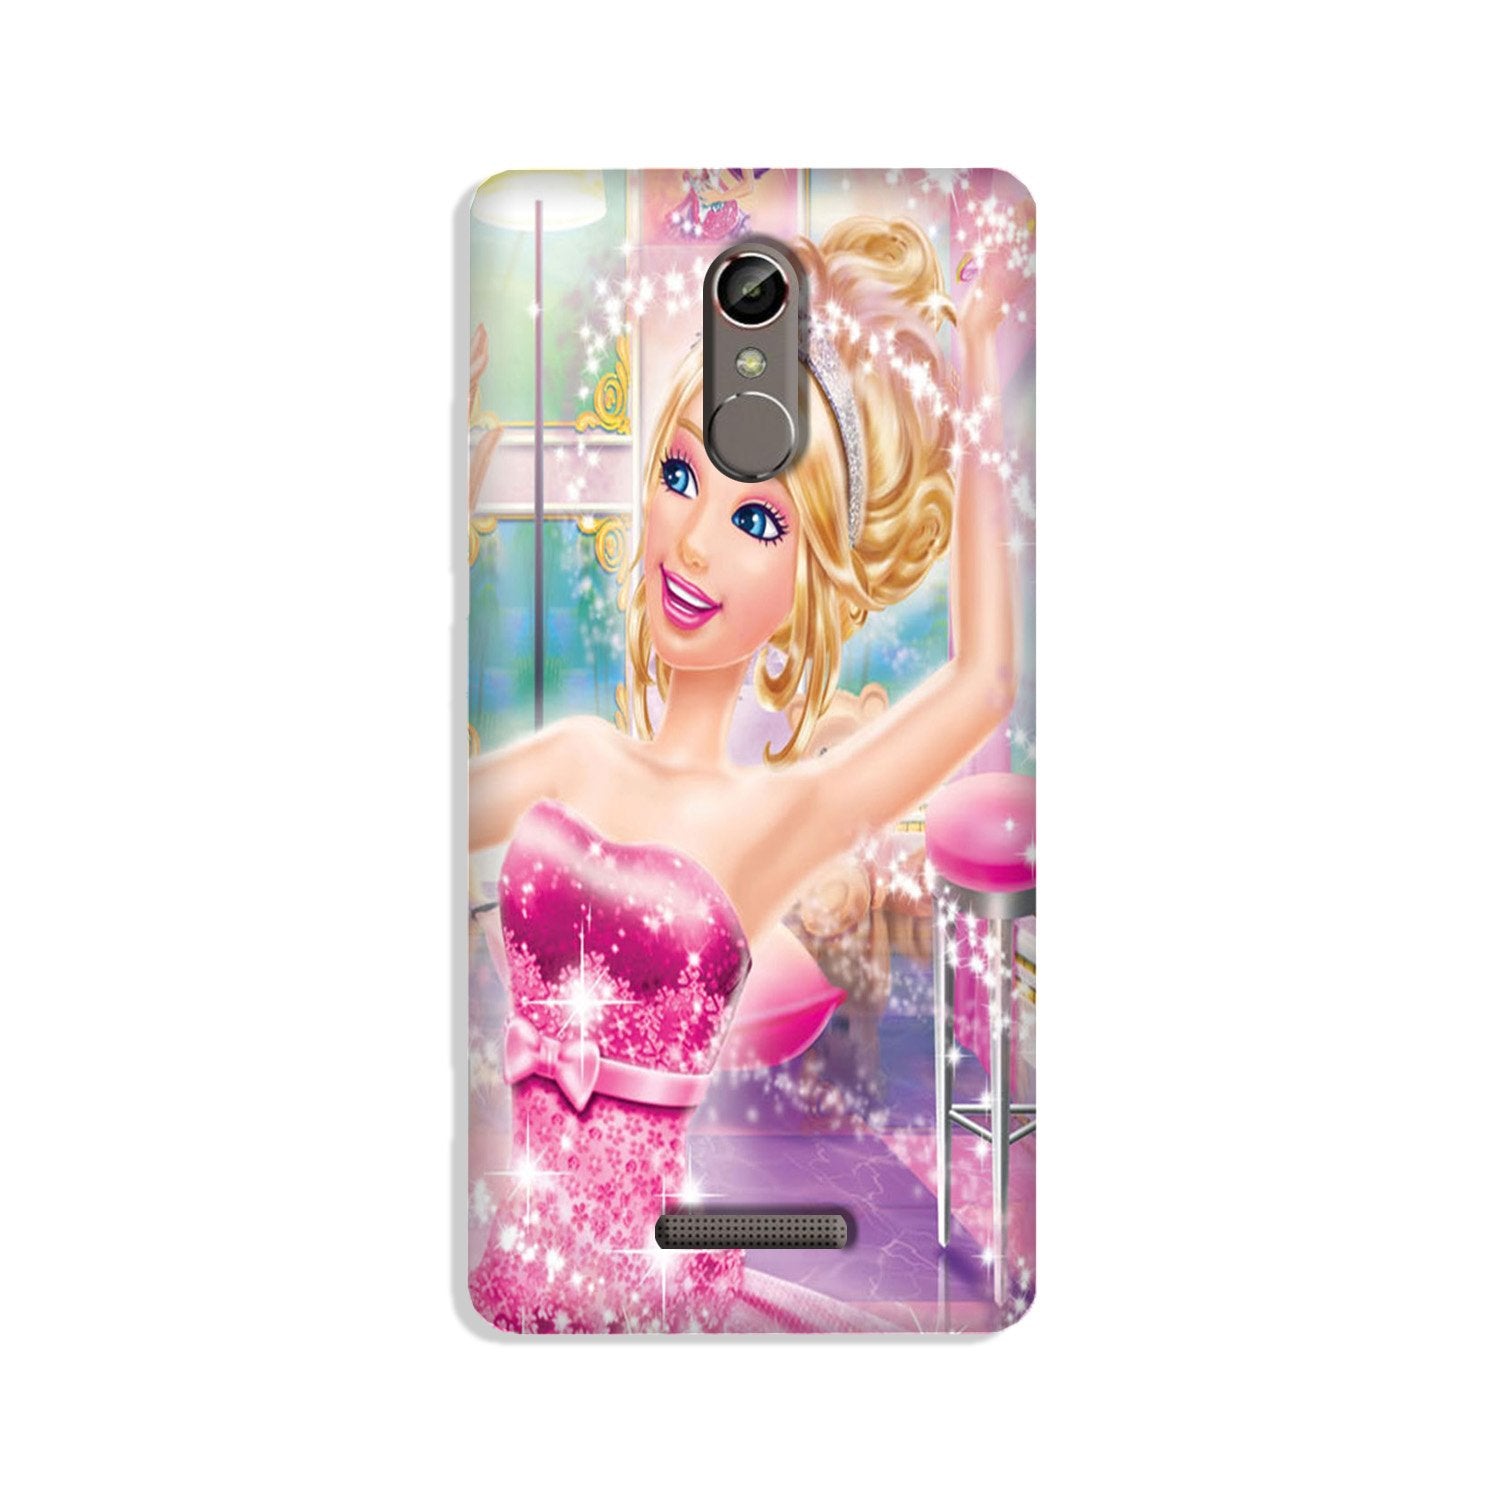 Princesses Case for Gionee S6s